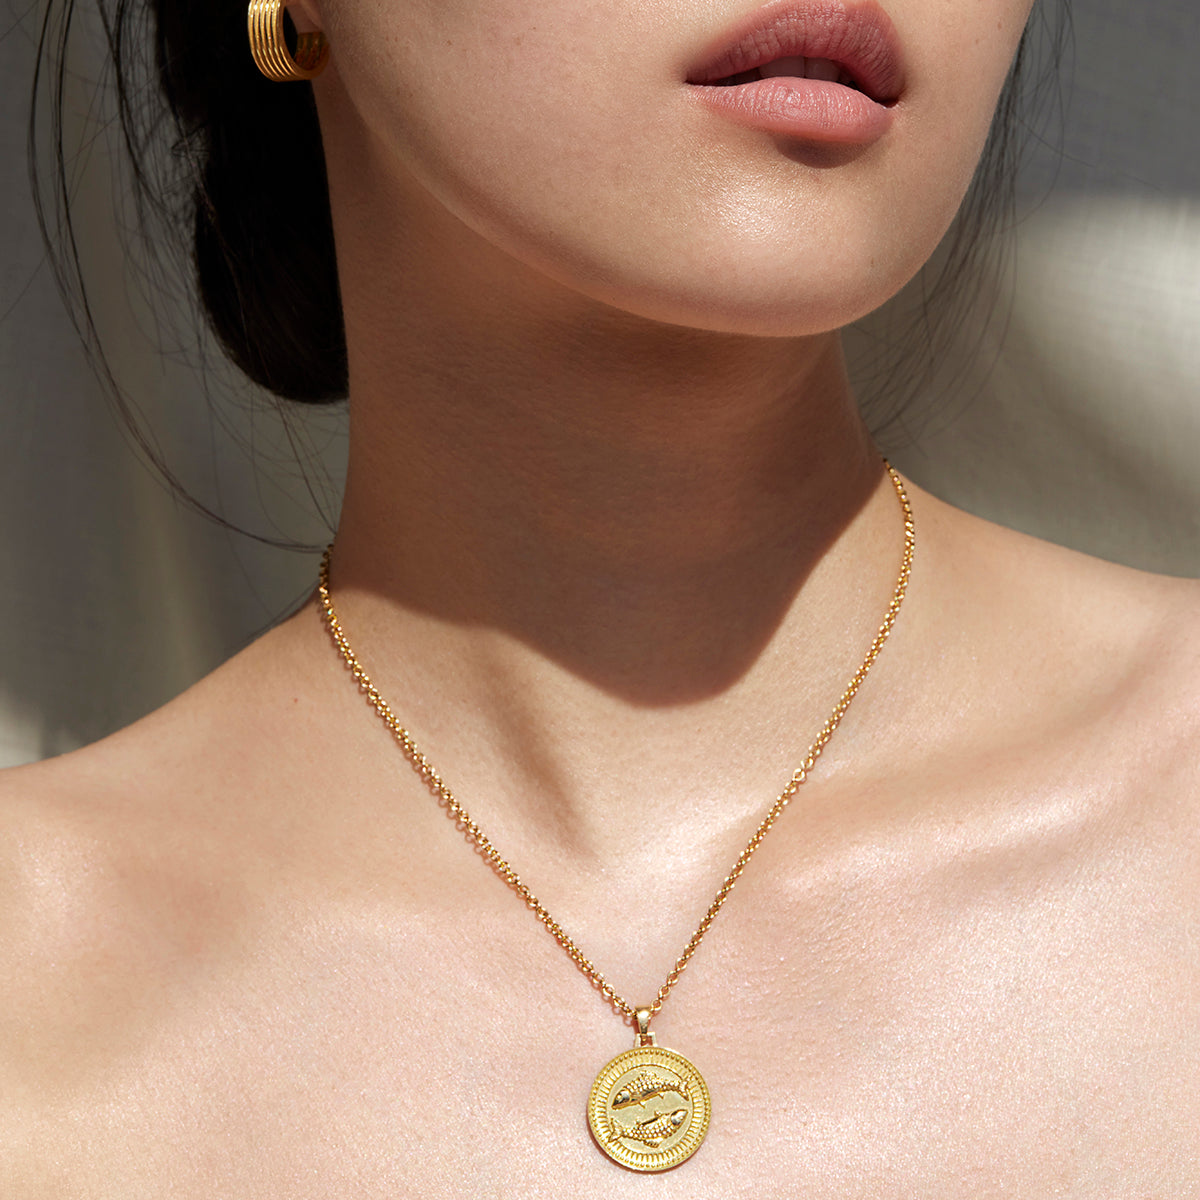 Woman from Lips to Shoulders Wearing Ethical Gold Pisces Pendant Necklace